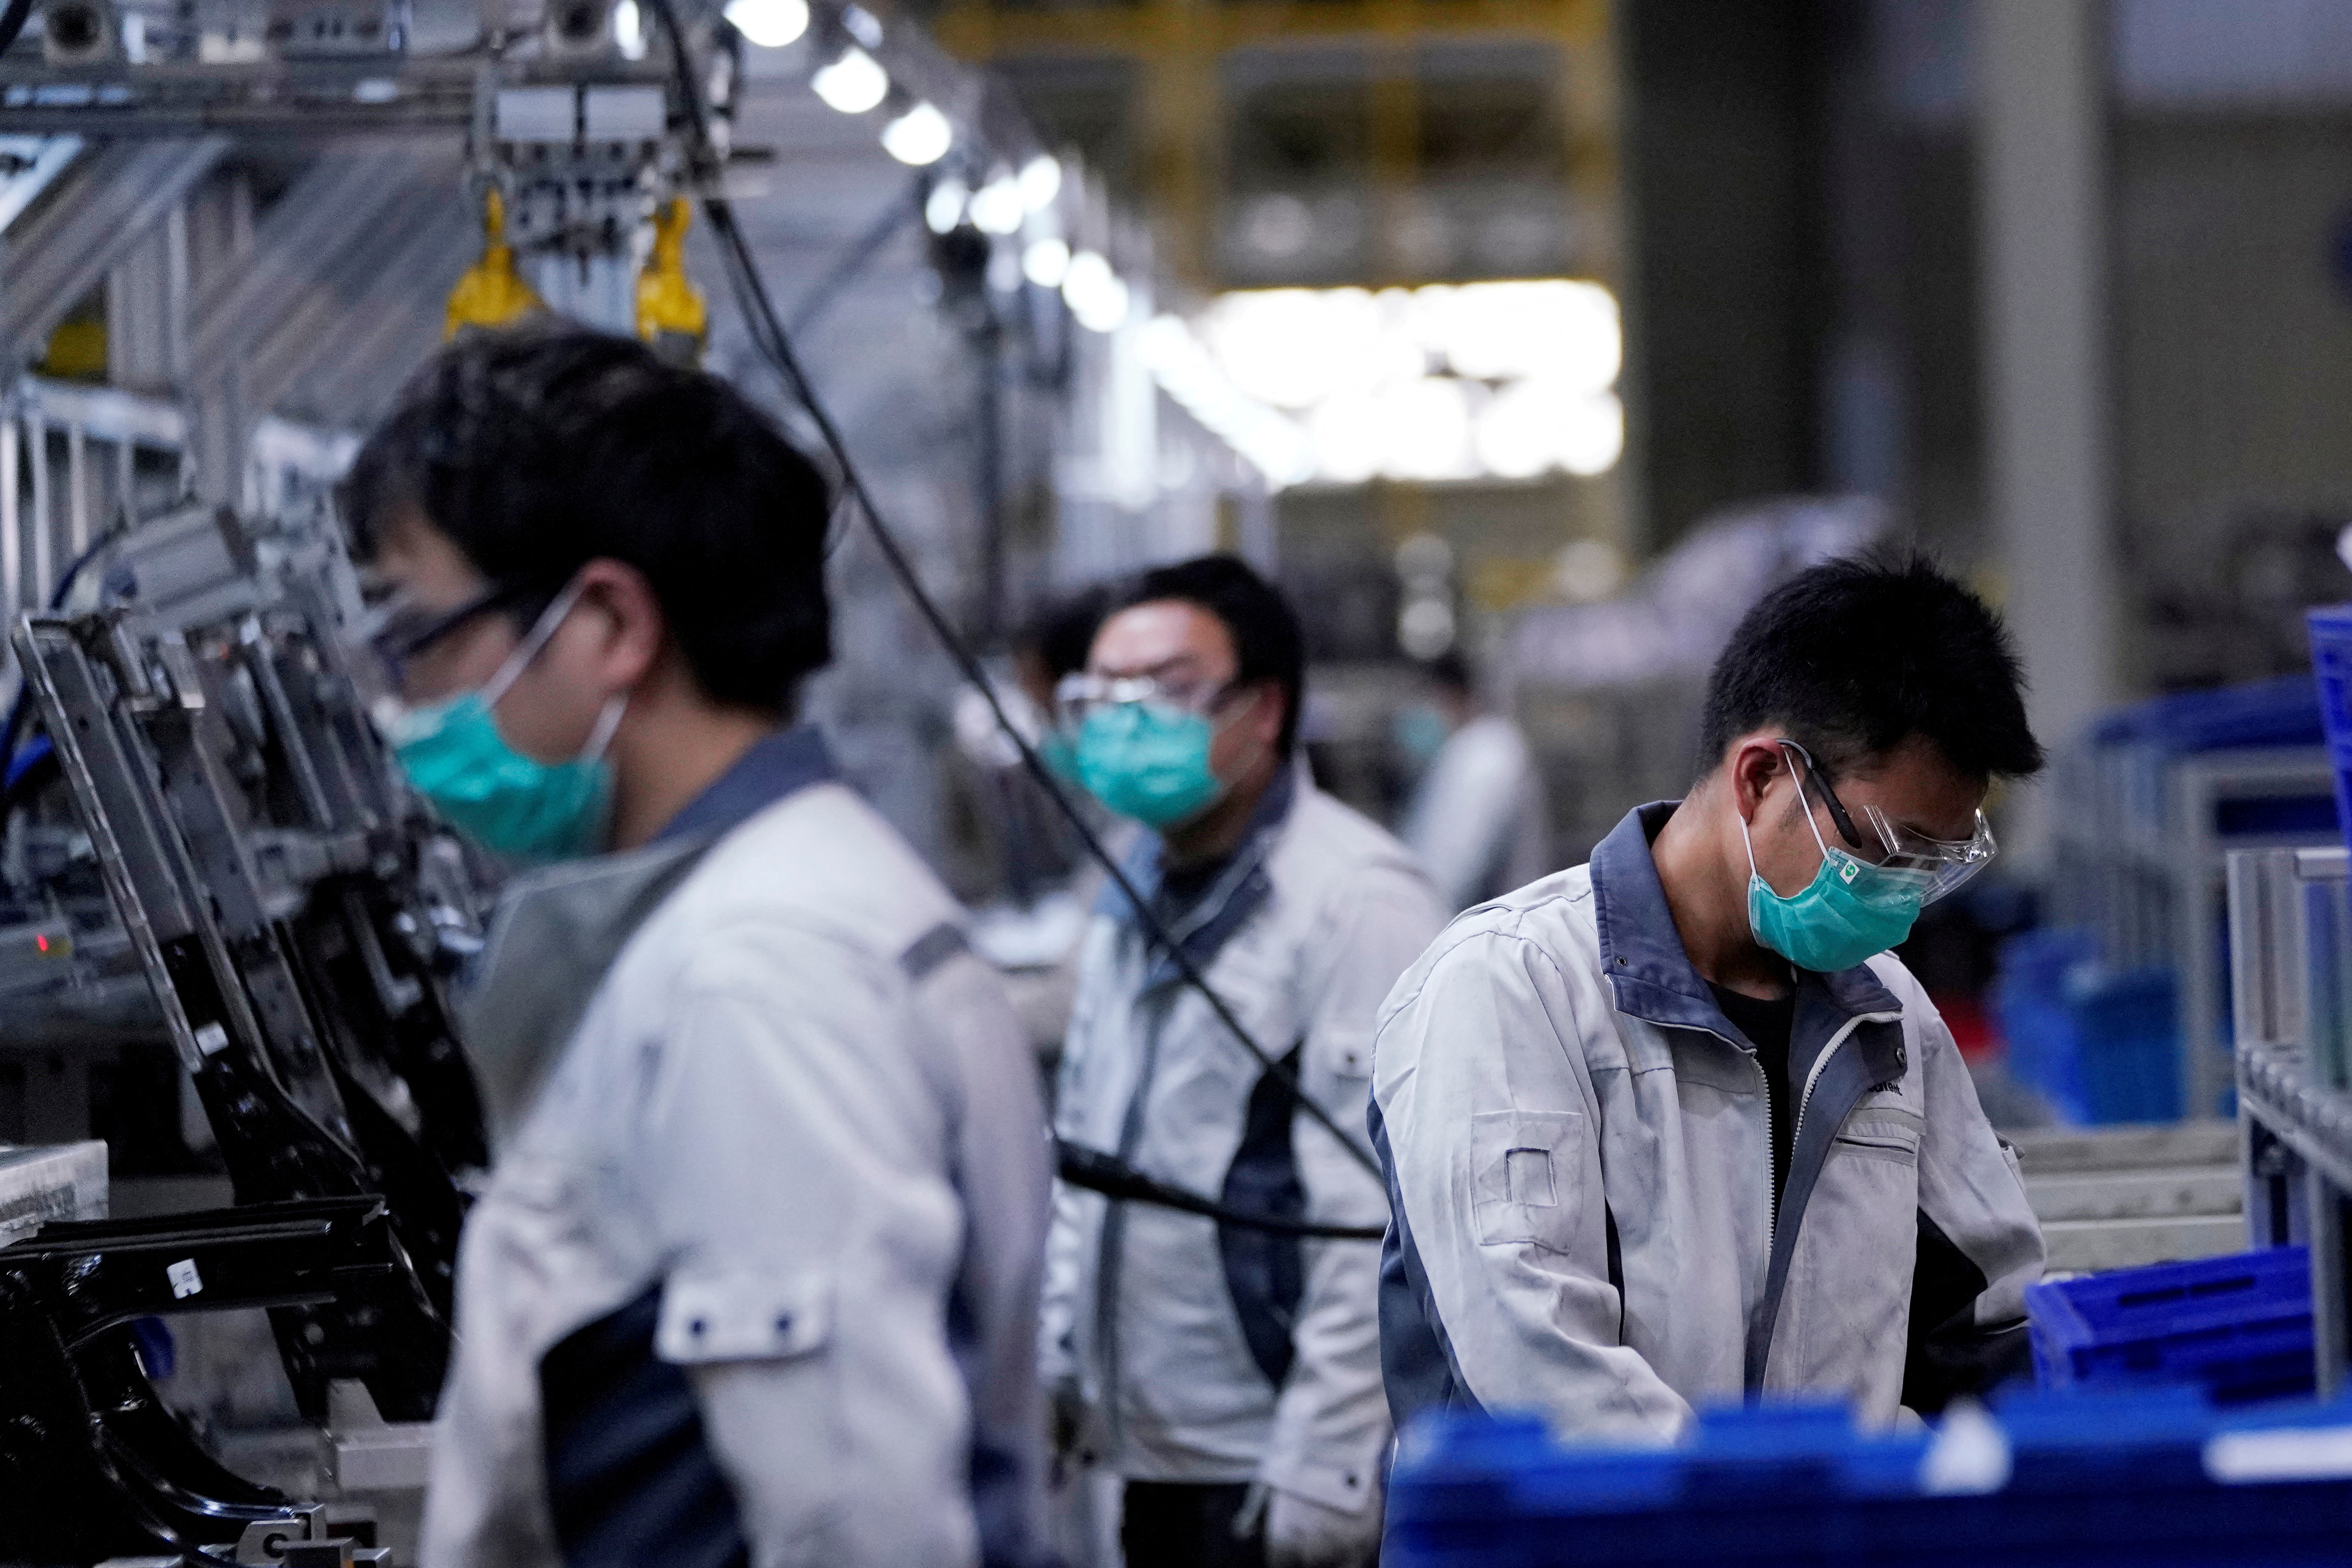 FILE PHOTO: Employees wearing face masks work on a car seat assembly line at Yanfeng Adient factory in Shanghai, China, as the country is hit by an outbreak of a new coronavirus, February 24, 2020. REUTERS/Aly Song/File Photo